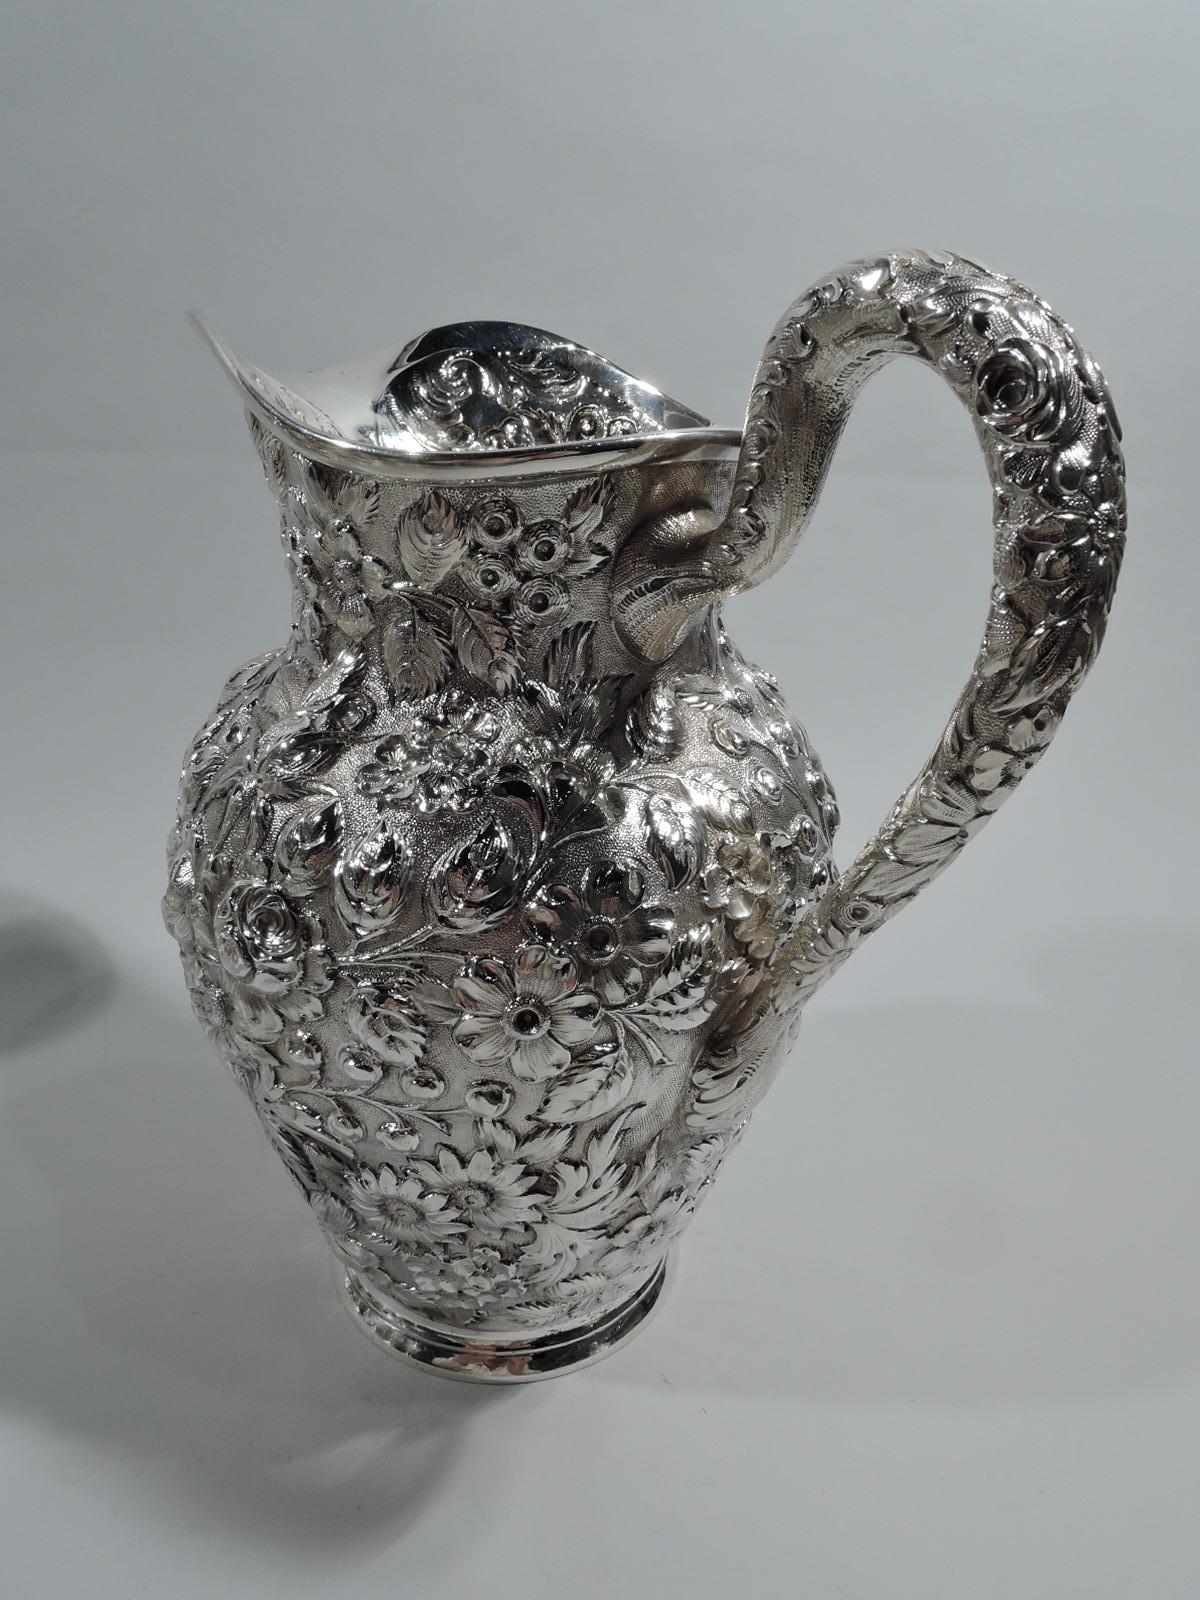 Repoussé Baltimore Repousse Sterling Silver Drinks Set with Pitcher & Goblets